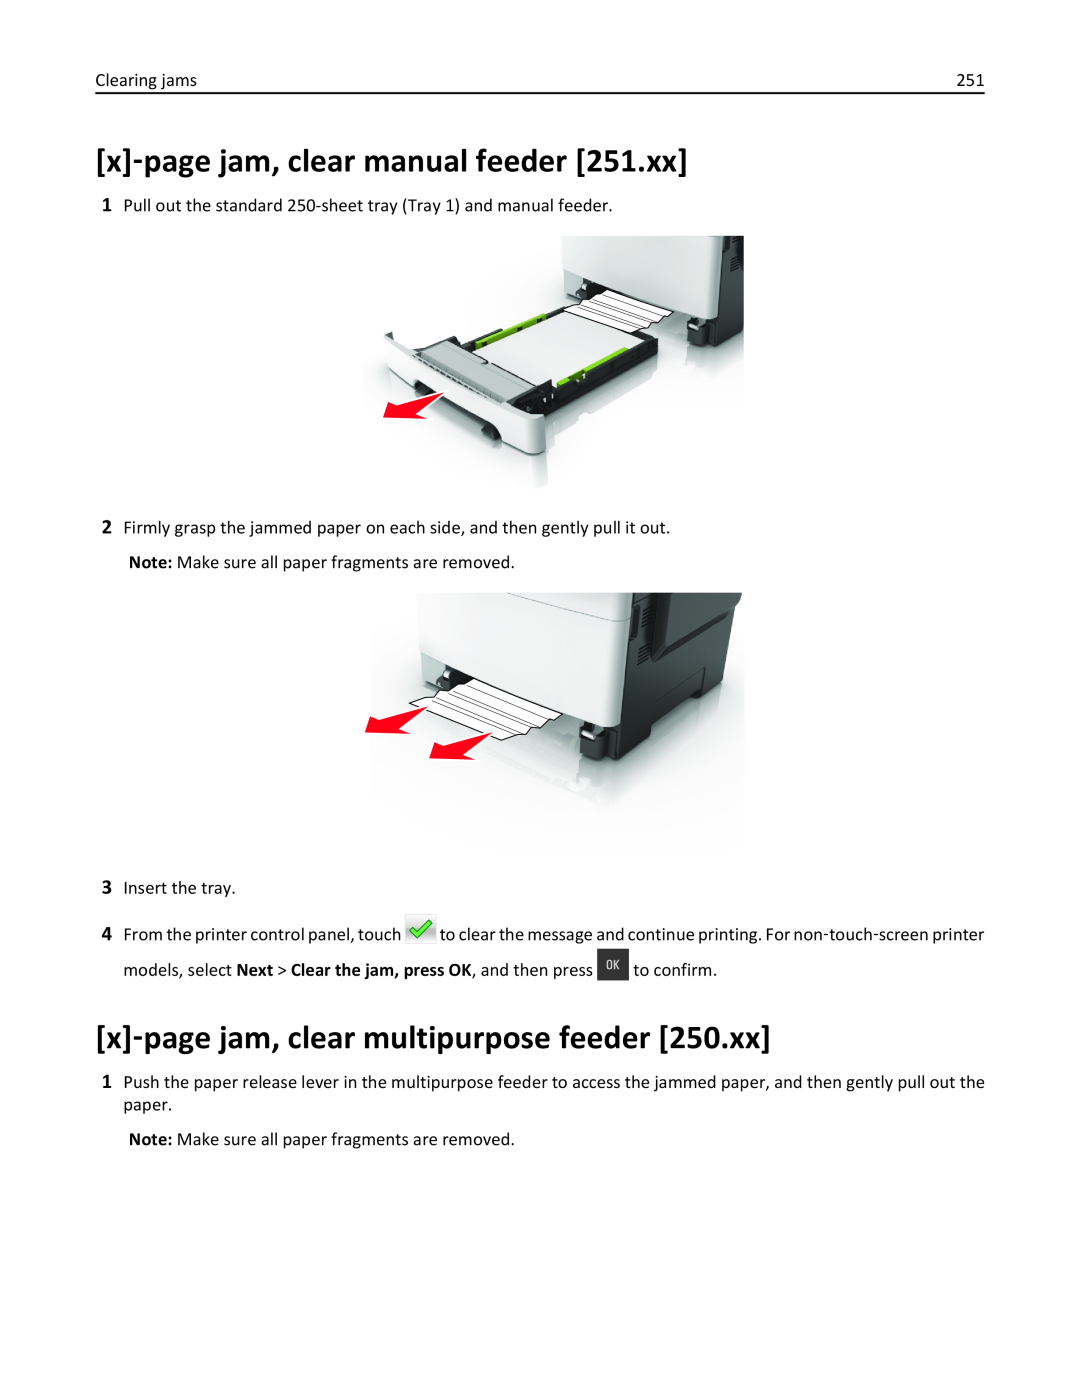 Lexmark 436 x‑page jam, clear manual feeder, x‑page jam, clear multipurpose feeder 